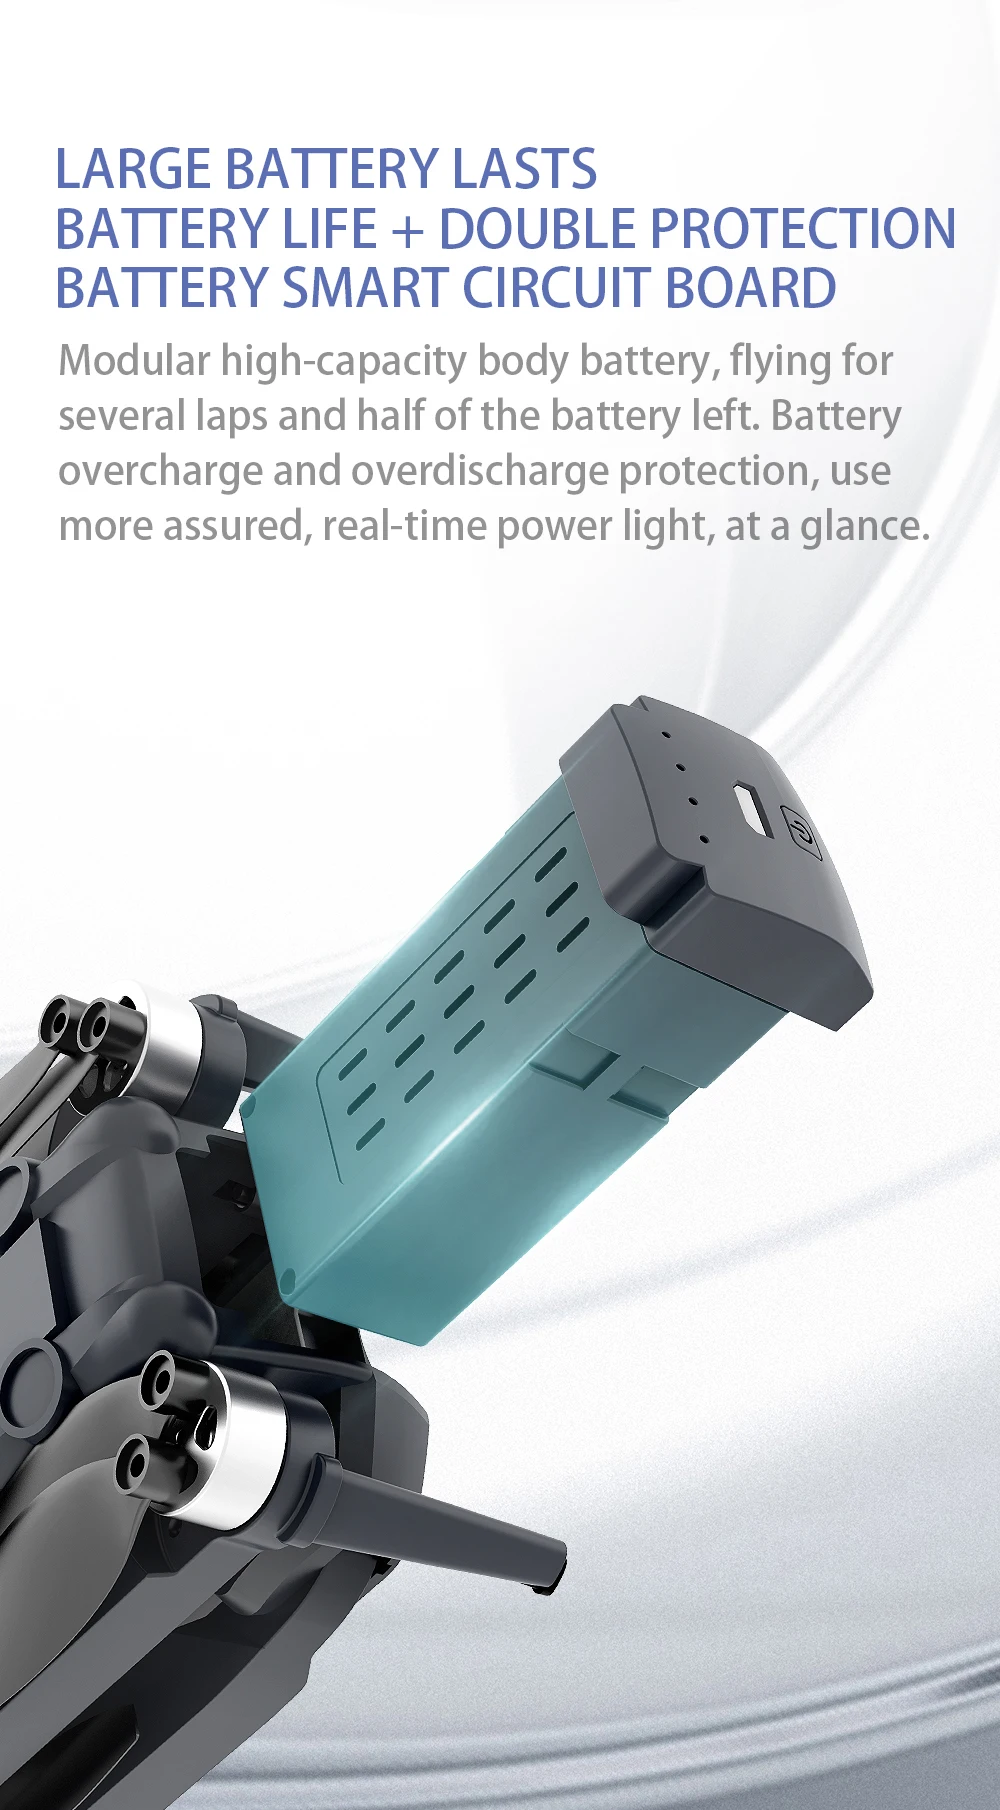 KFPLAN KF106 Drone, battery overcharge and overdischarge protection, use more assured, real-time power light